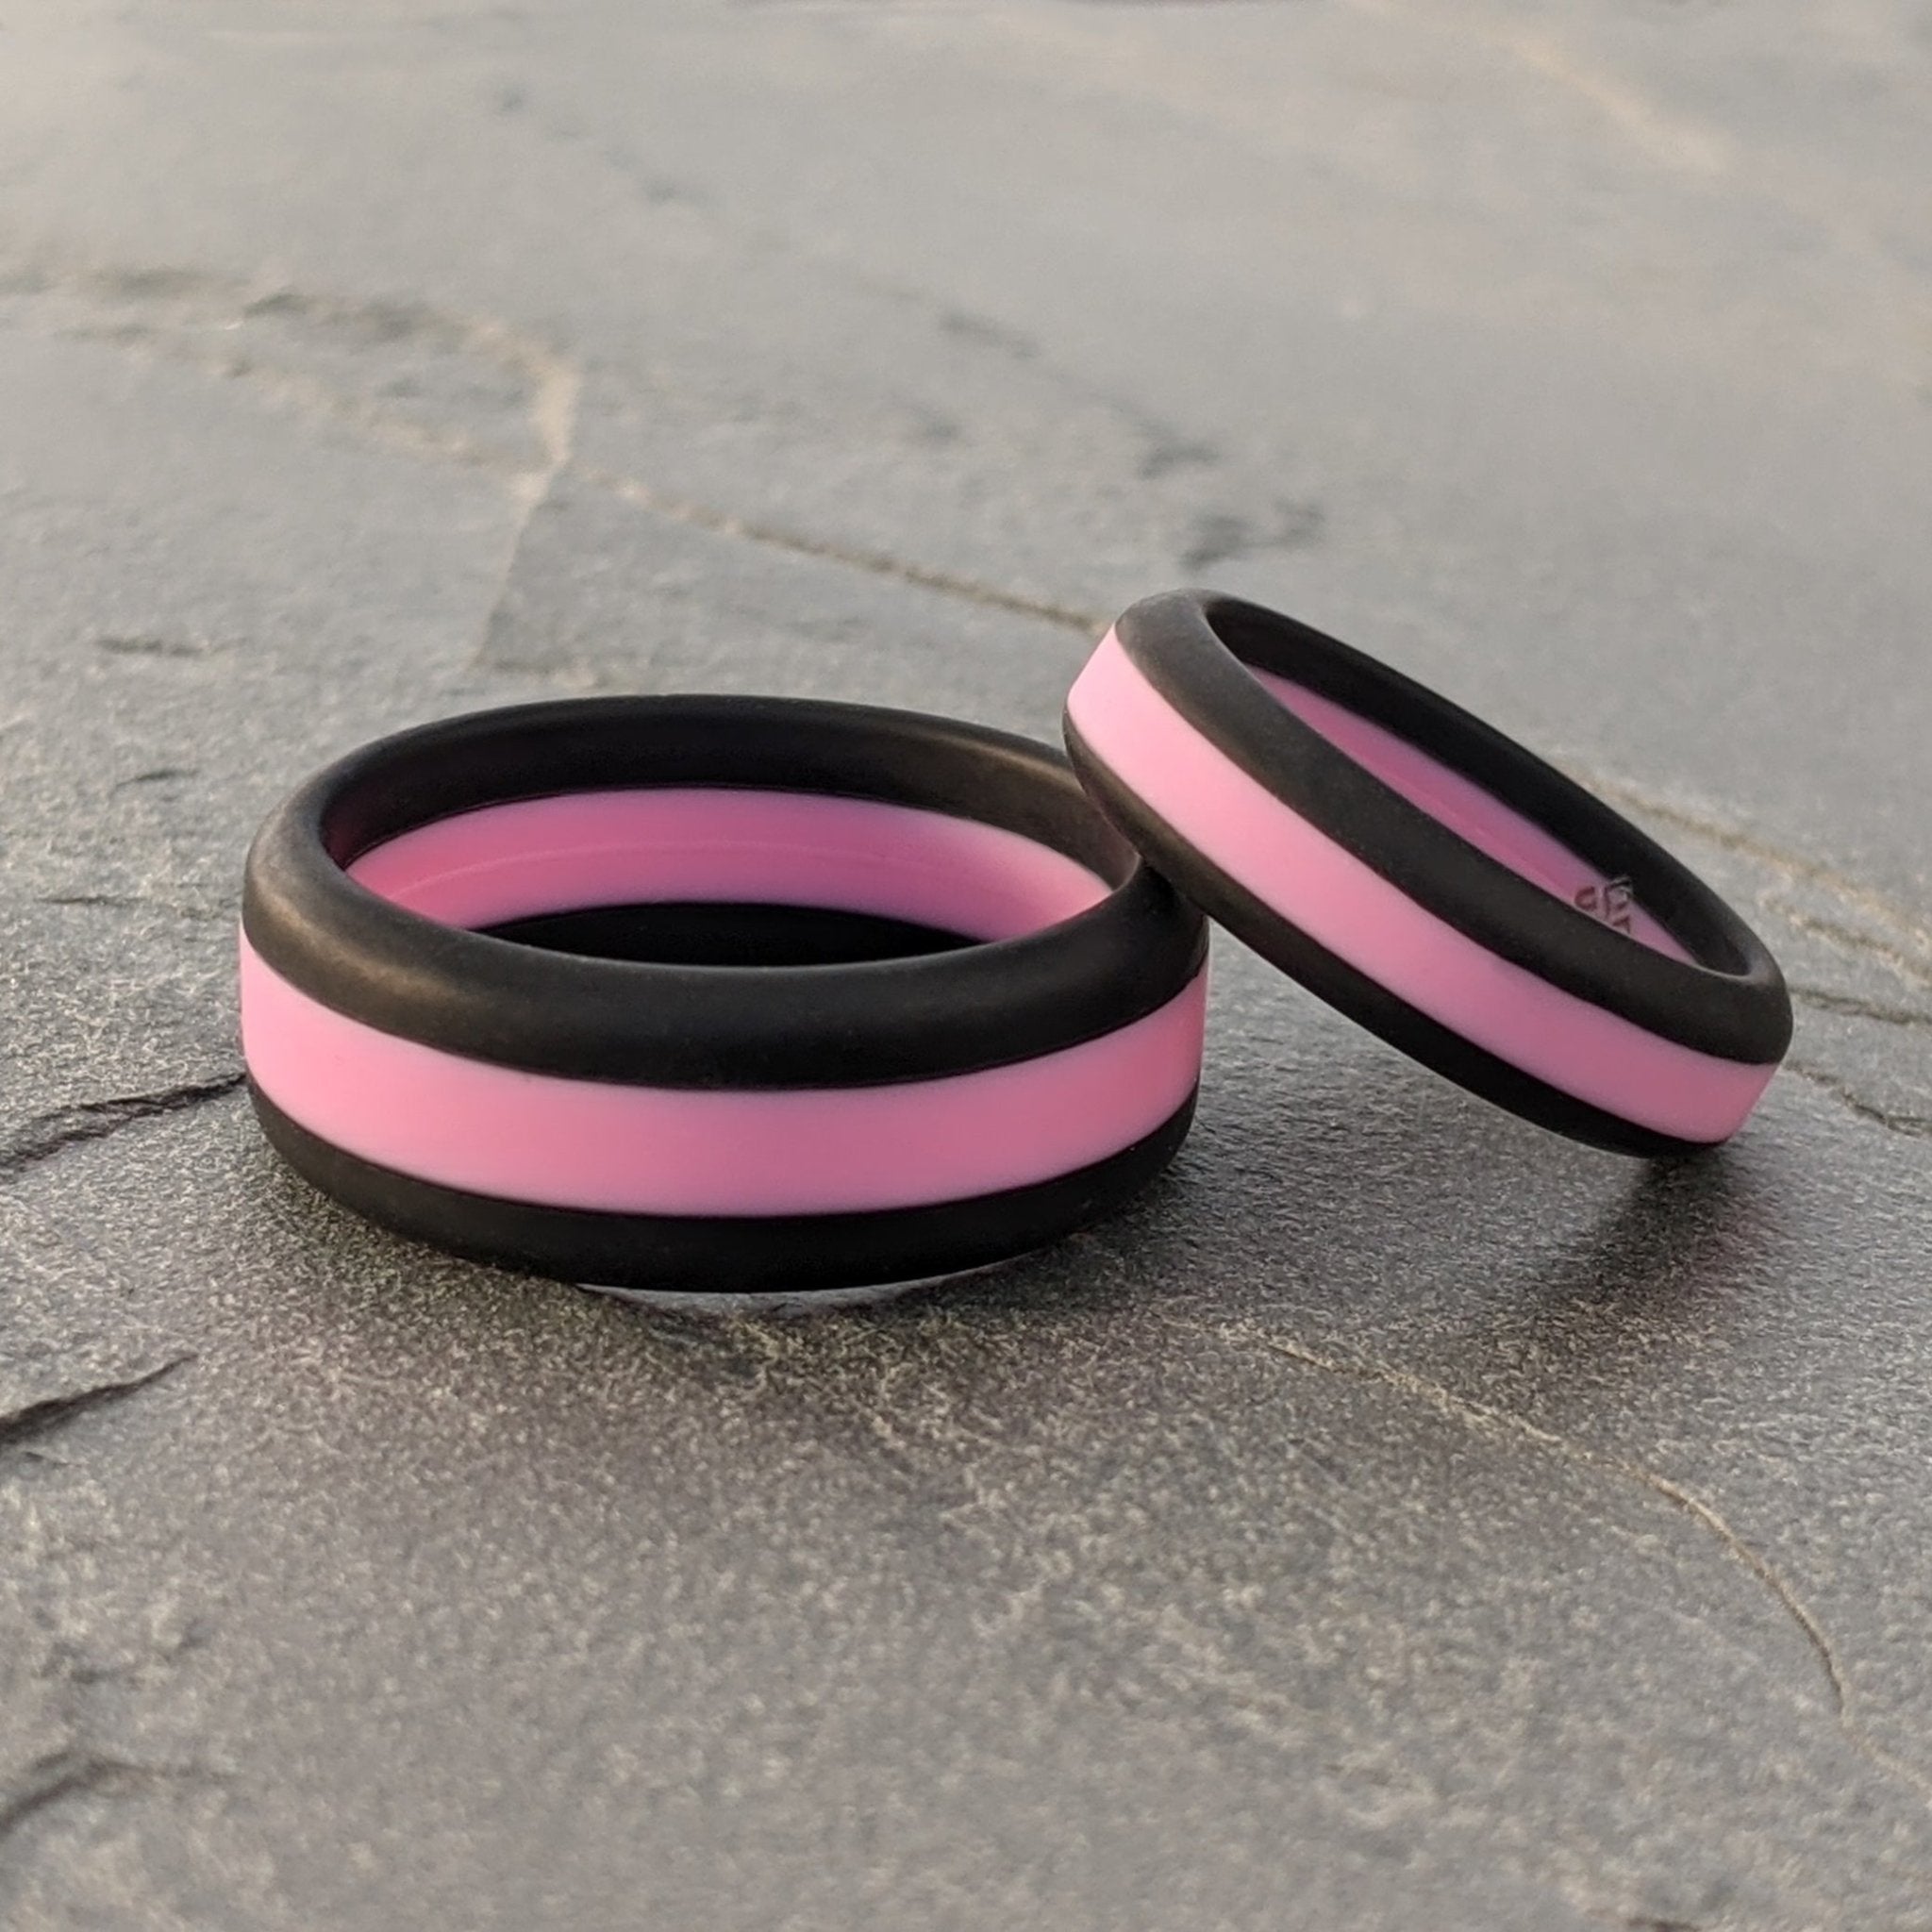 Pink and Black Candy Stripe Silicone Wedding Ring for Women and Men - Knot Theory